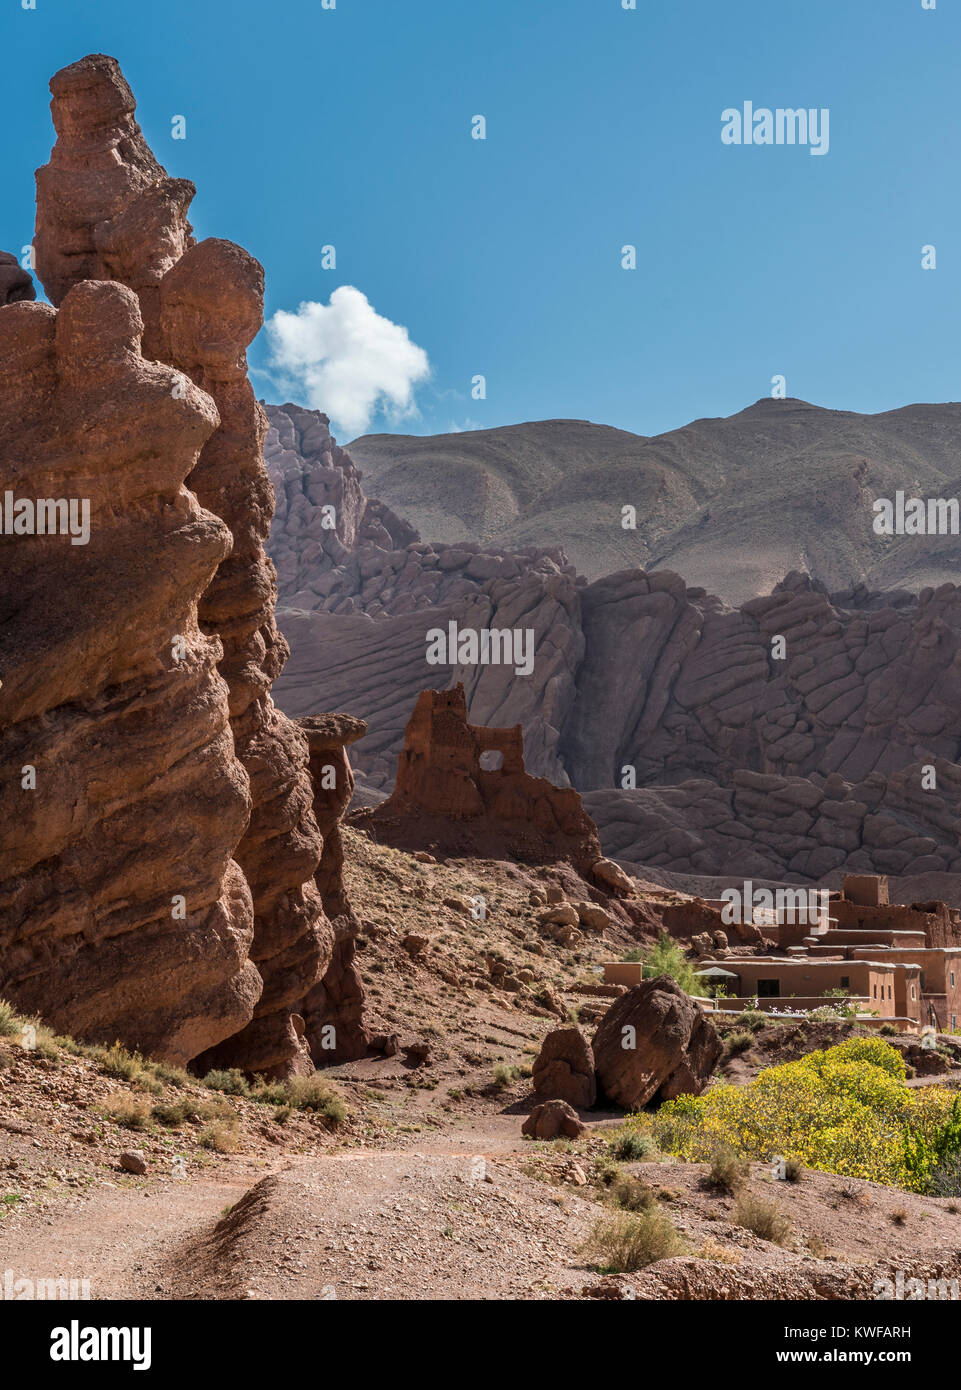 Image of Moroccan landscape Stock Photo